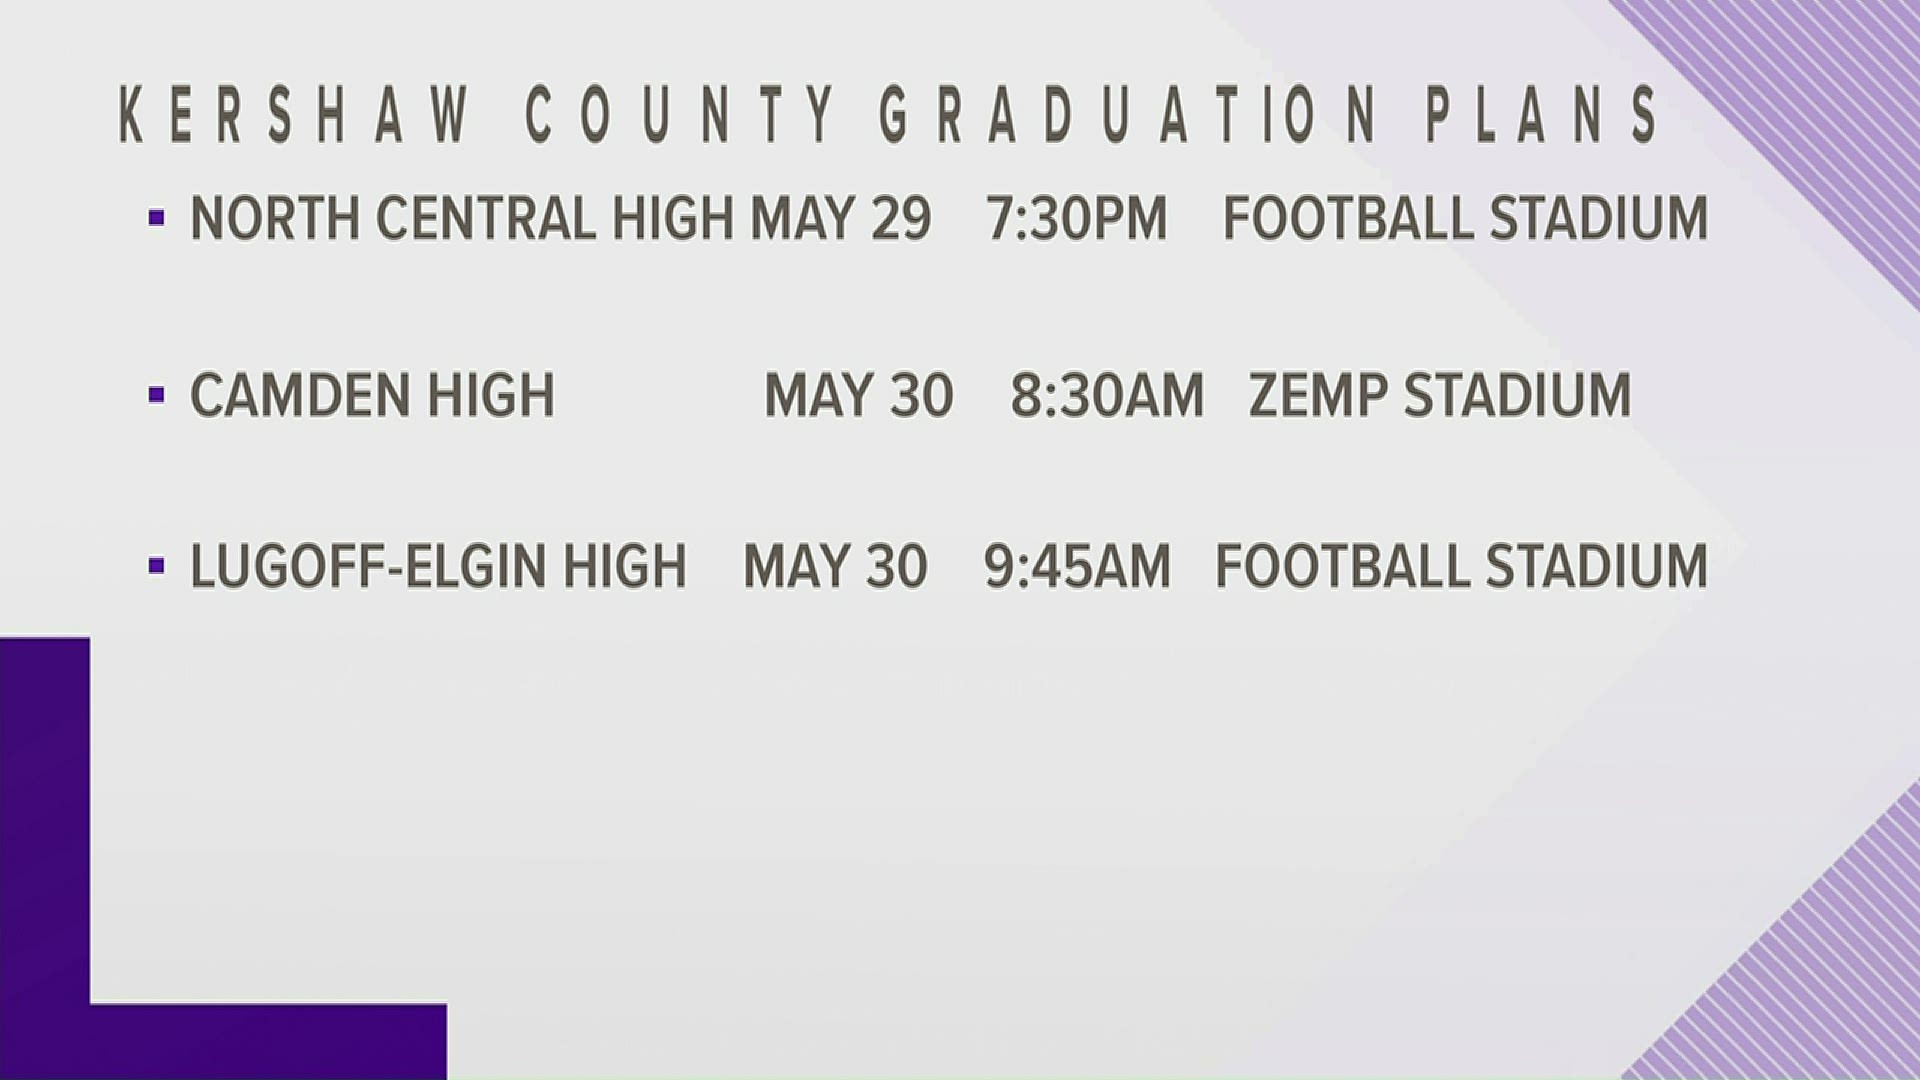 Kershaw County has announced tentative plans for graduation of its high school seniors.